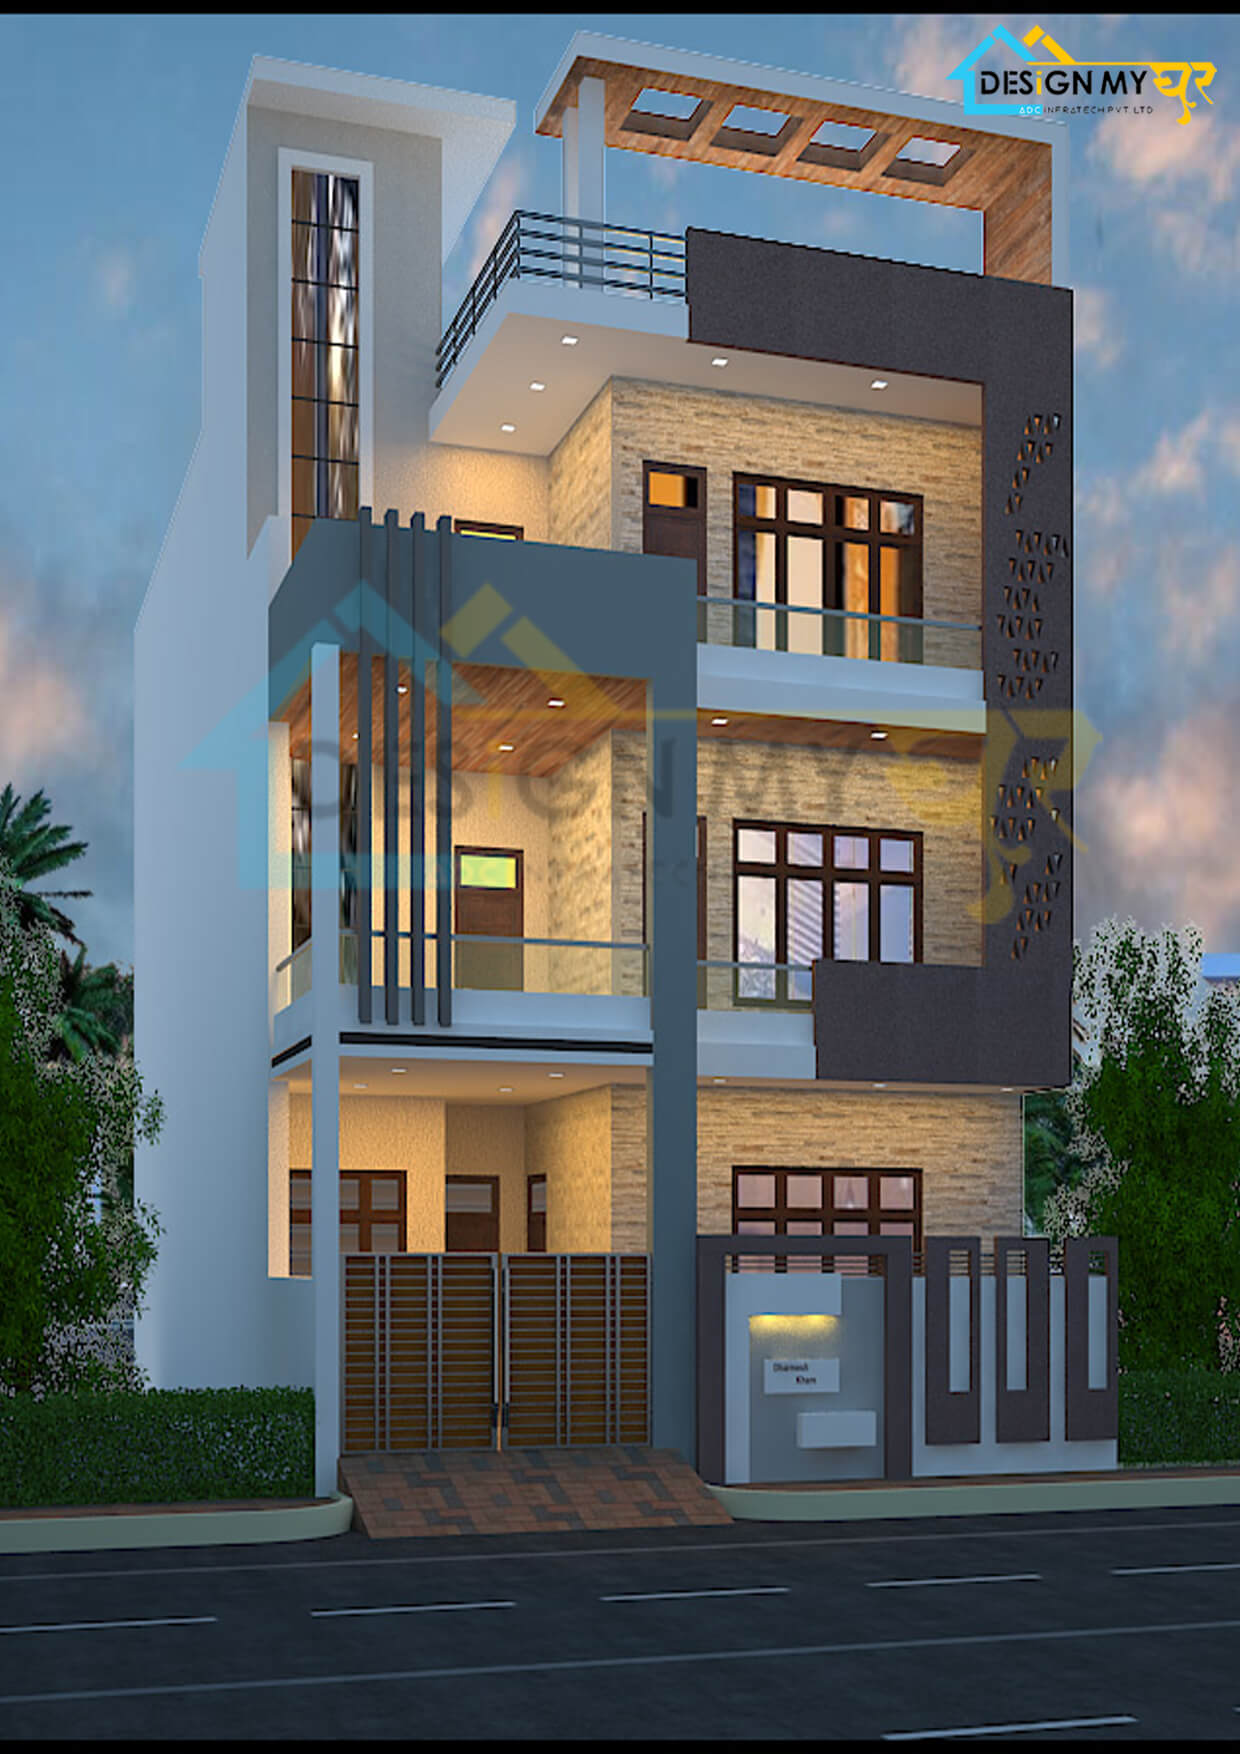 .My 3D House / My 3d House Let Us Build A 3d Model For Your House